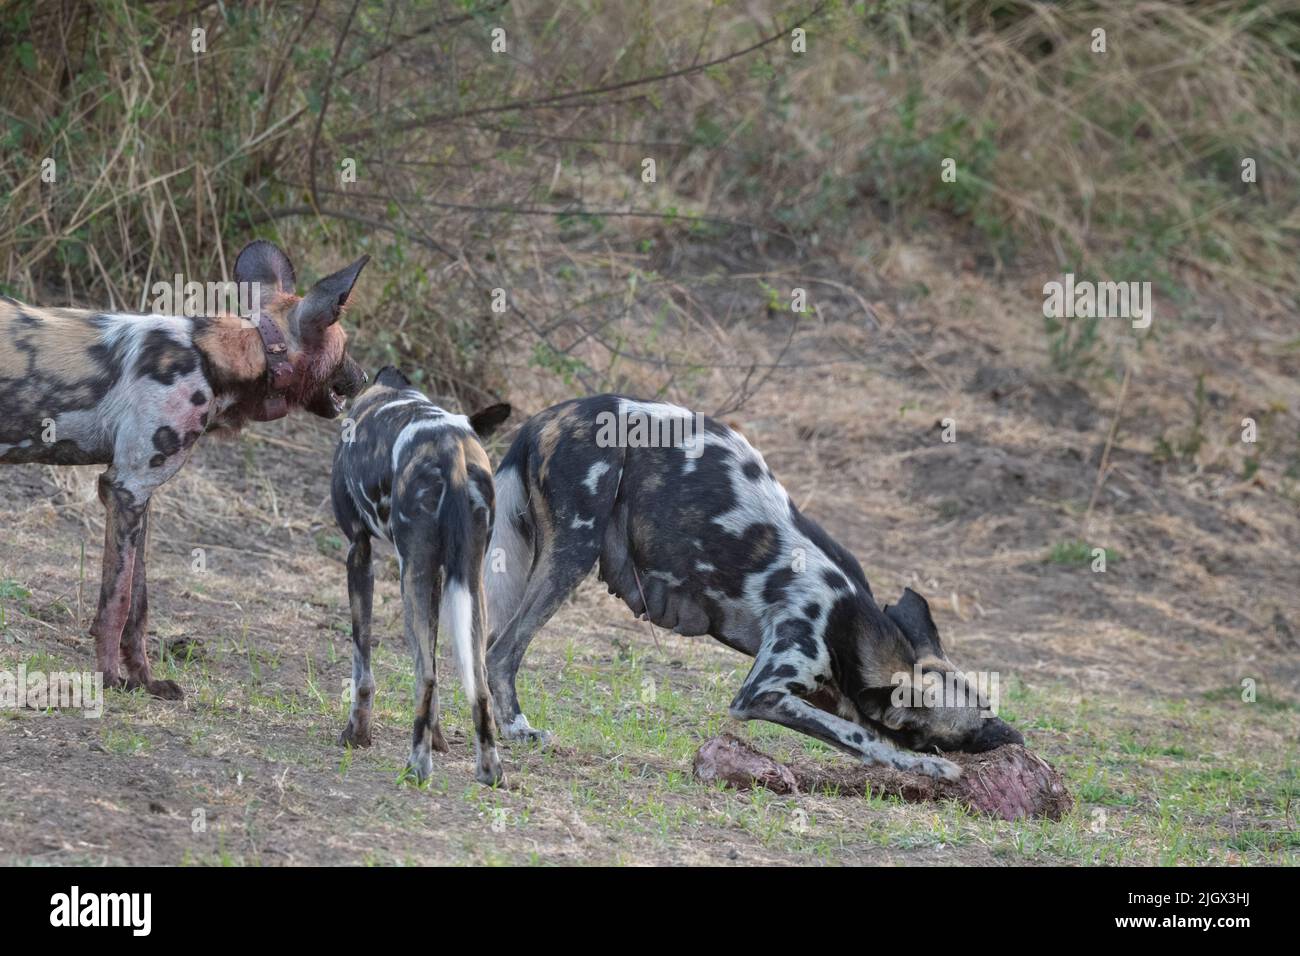 Zambia, South Luangwa National Park. African wild dogs (WILD: Lycaon pictus) Lactating Alpha female feeding on impala kill while others guard her. Stock Photo